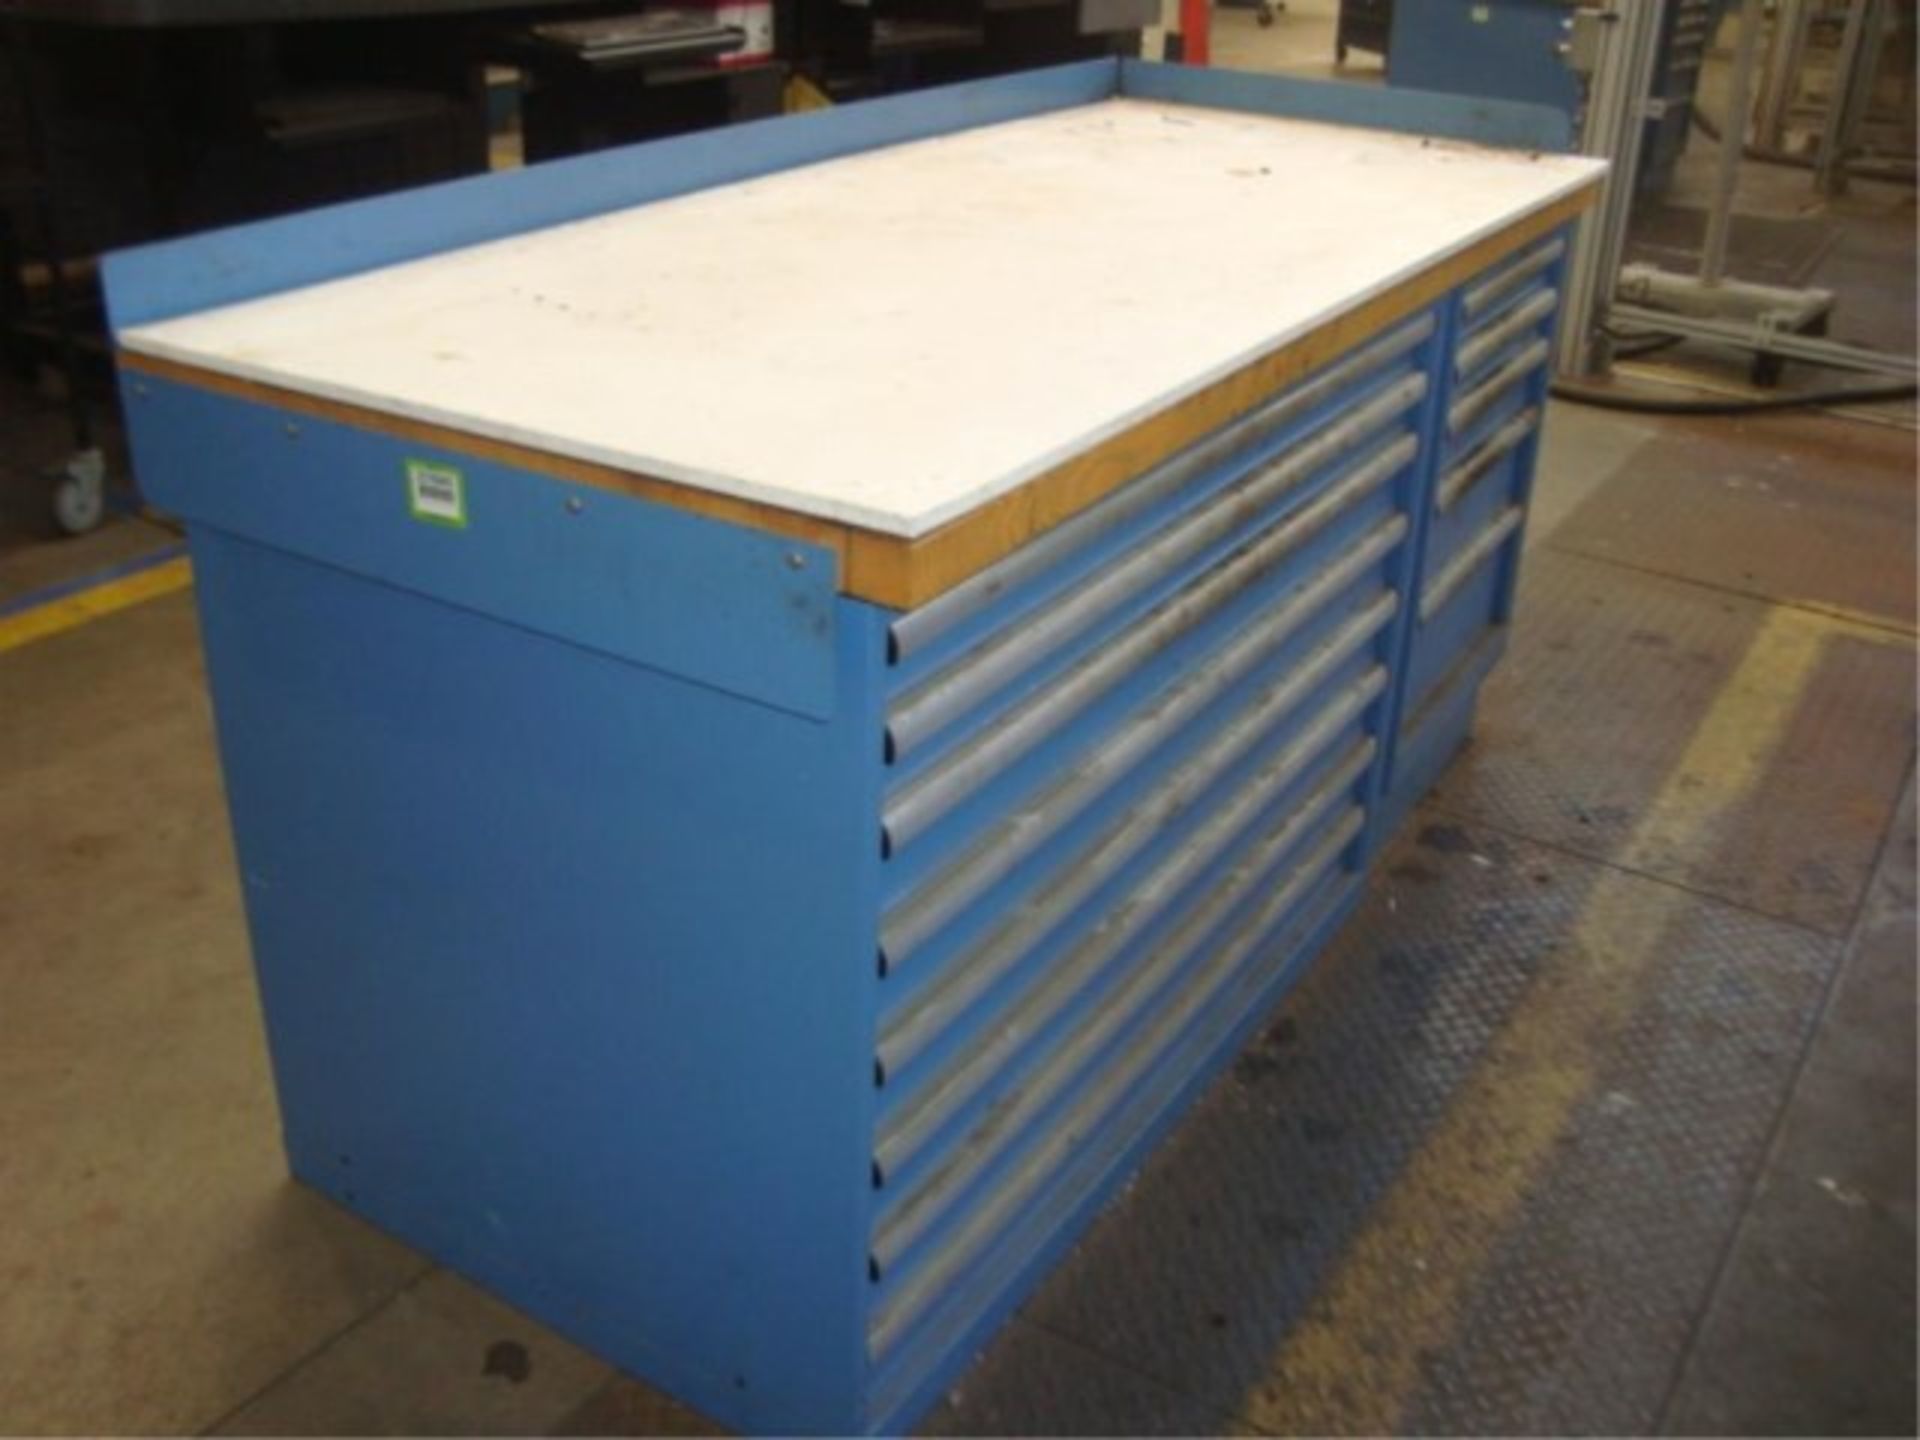 Workbench With Parts Supply Cabinets - Image 3 of 5